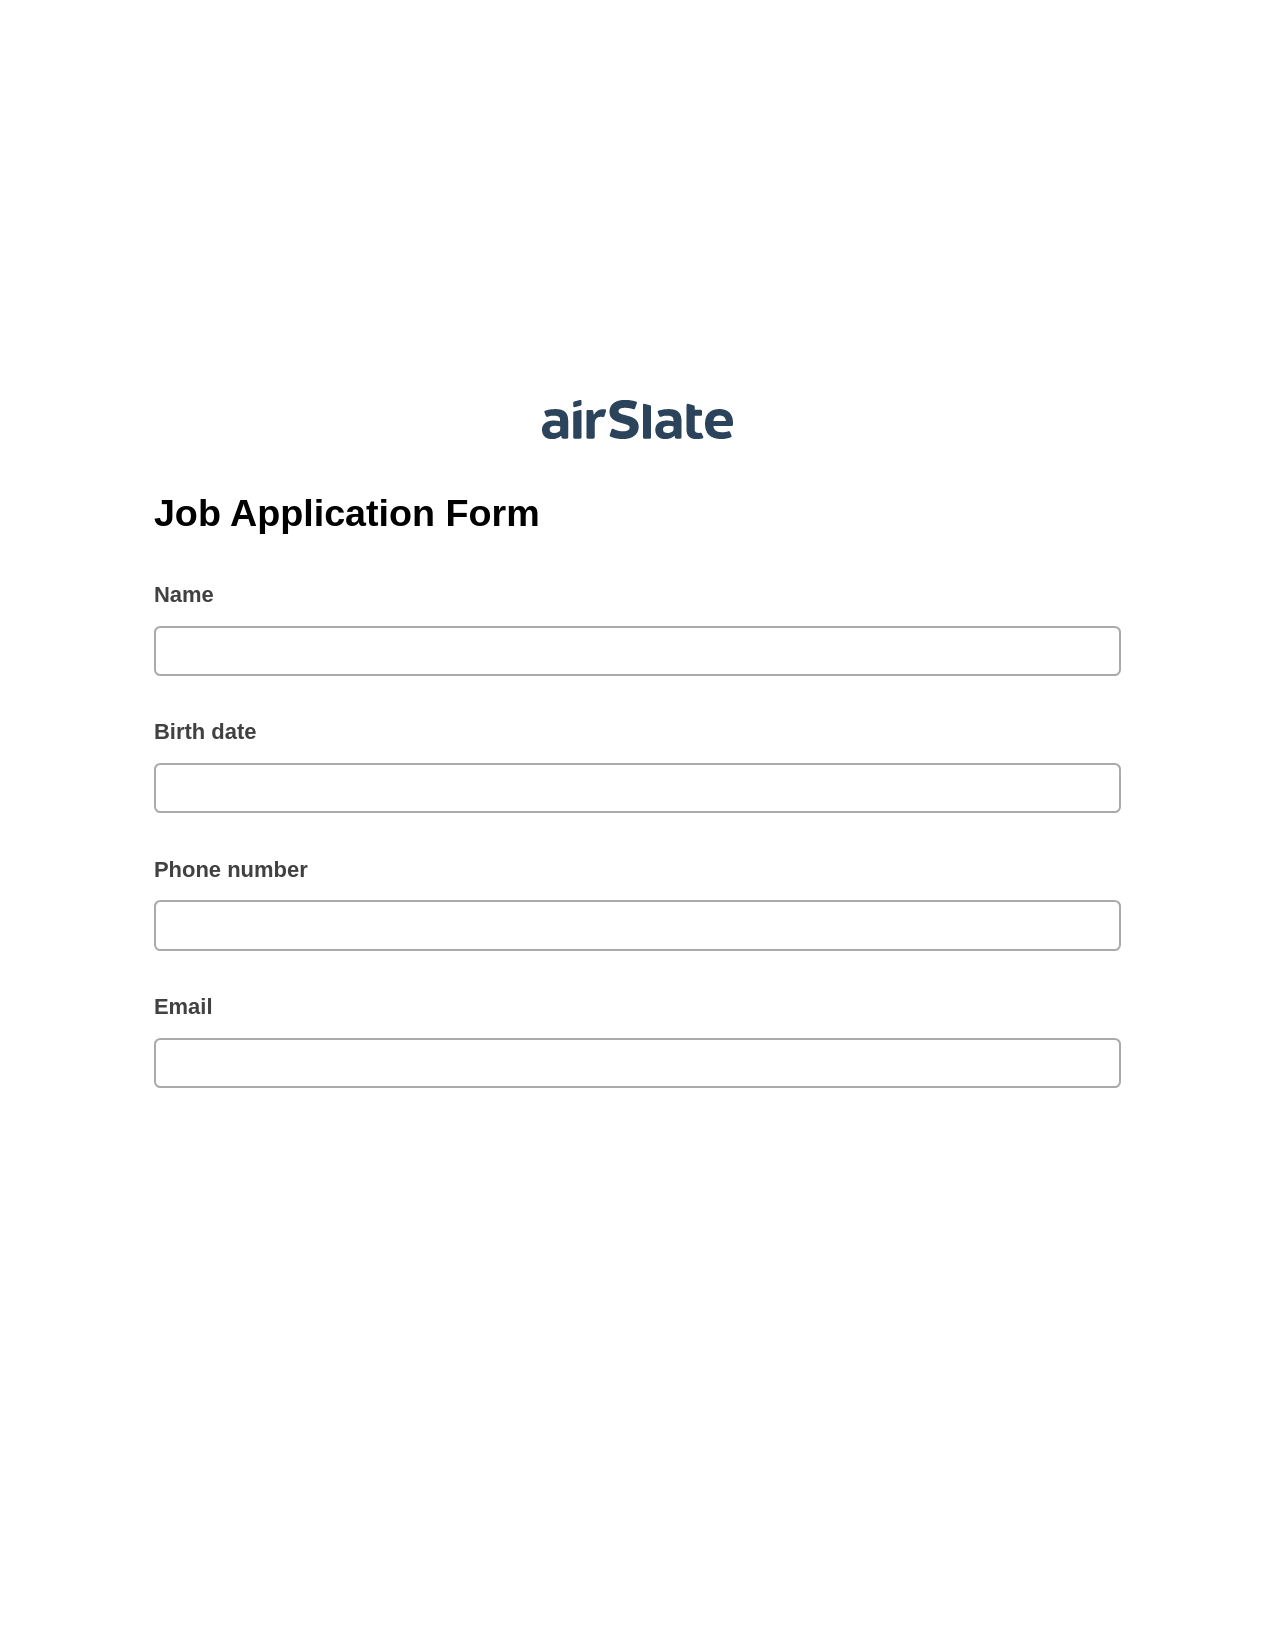 Multirole Job Application Form Pre-fill from Google Sheets Bot, Assign Slate Name Bot, Export to Excel 365 Bot